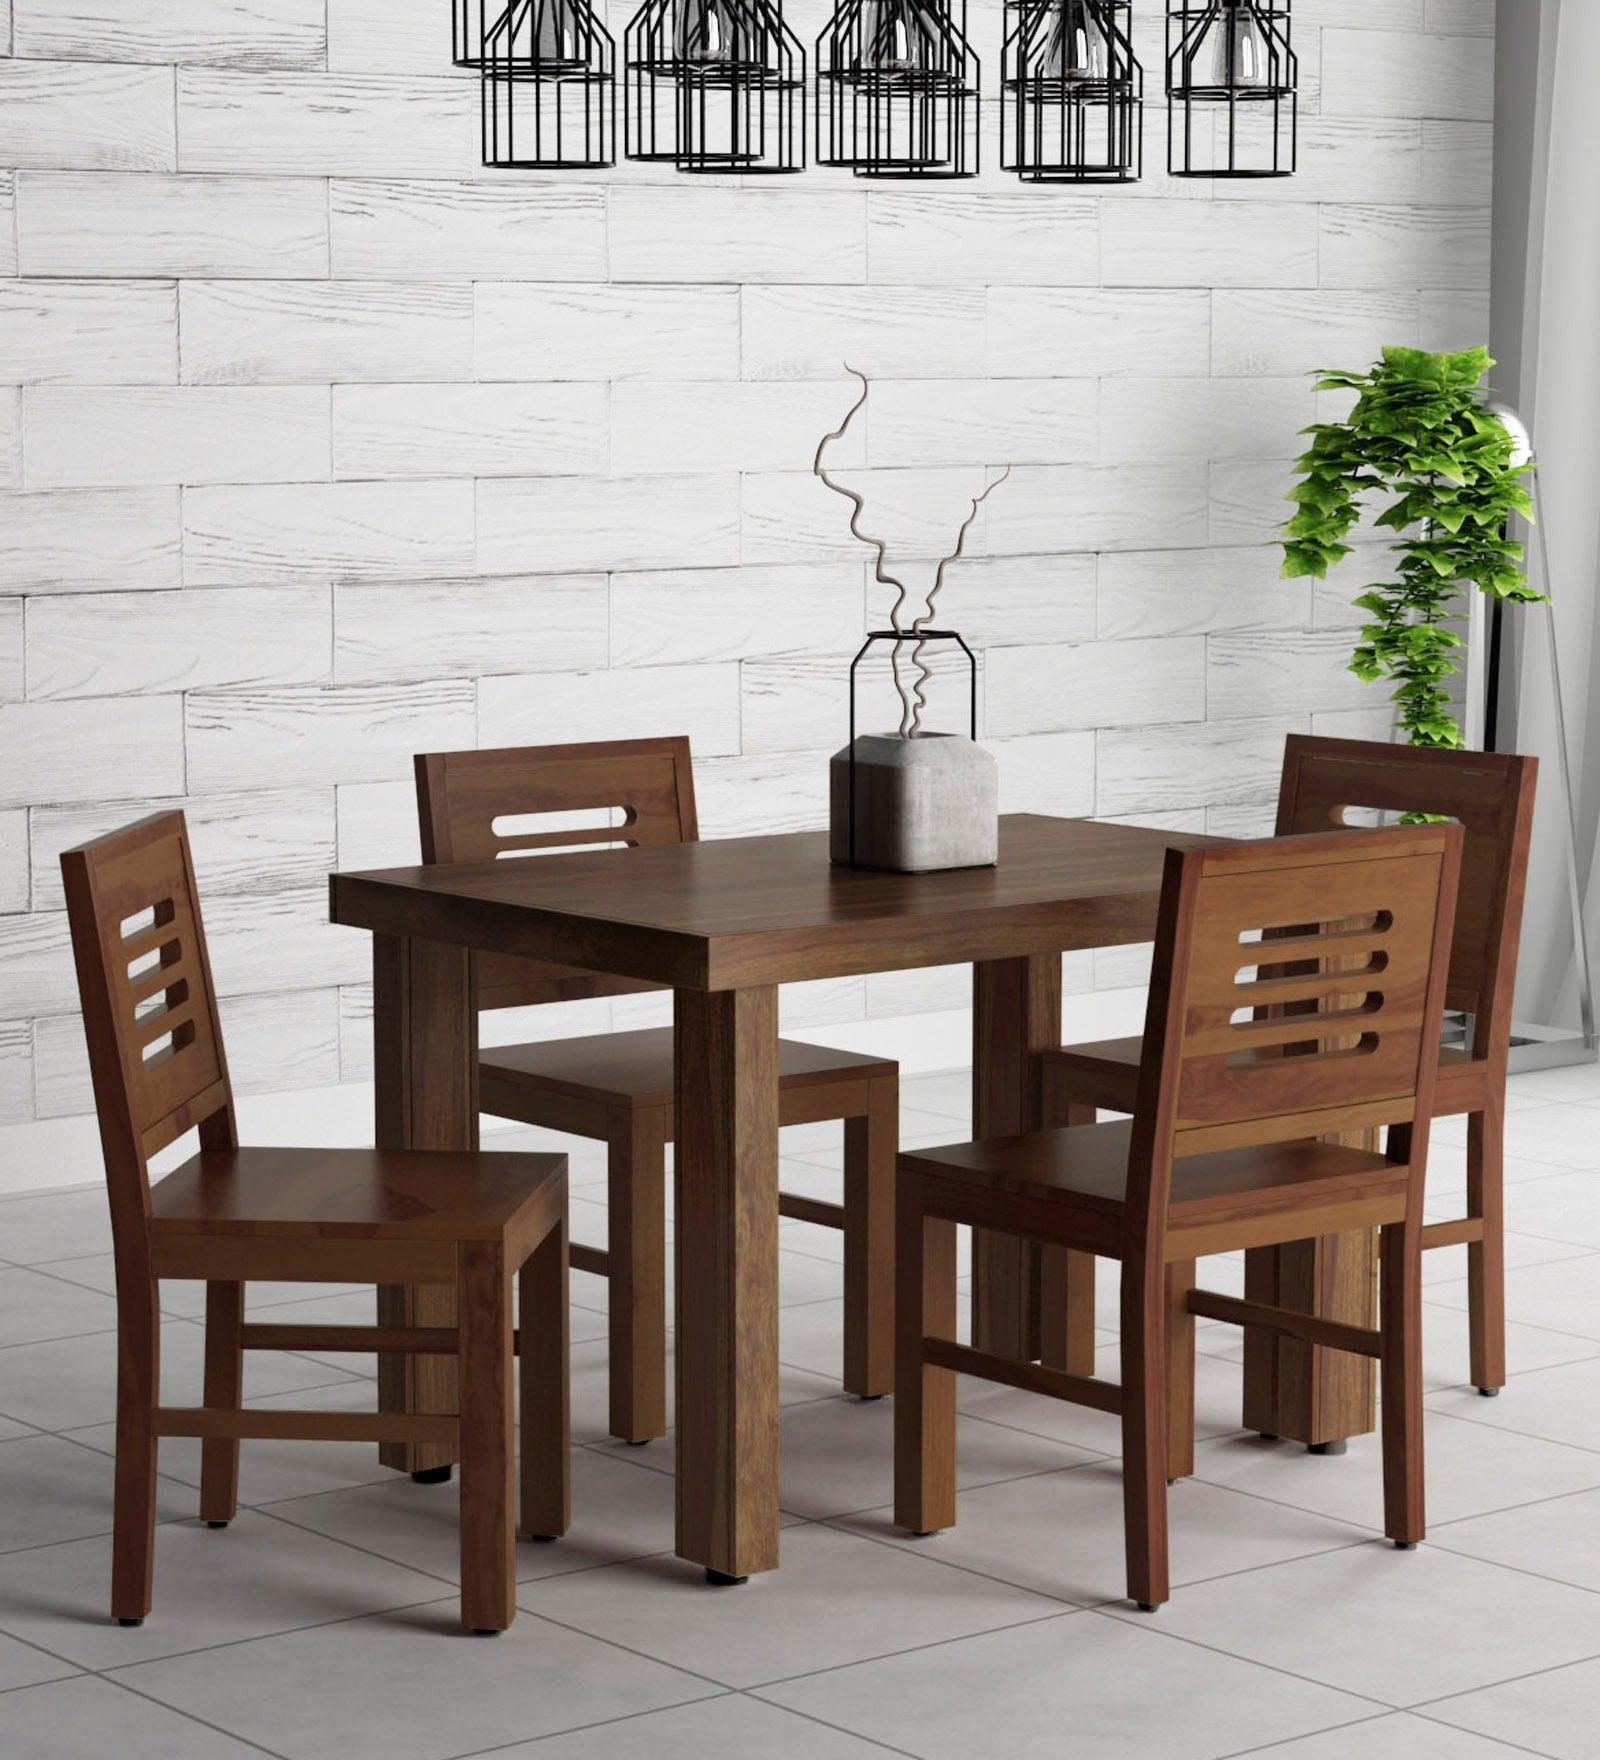 Acro Wooden 4 Seater Dining Table Set for Home Finish - Rajwada Furnish